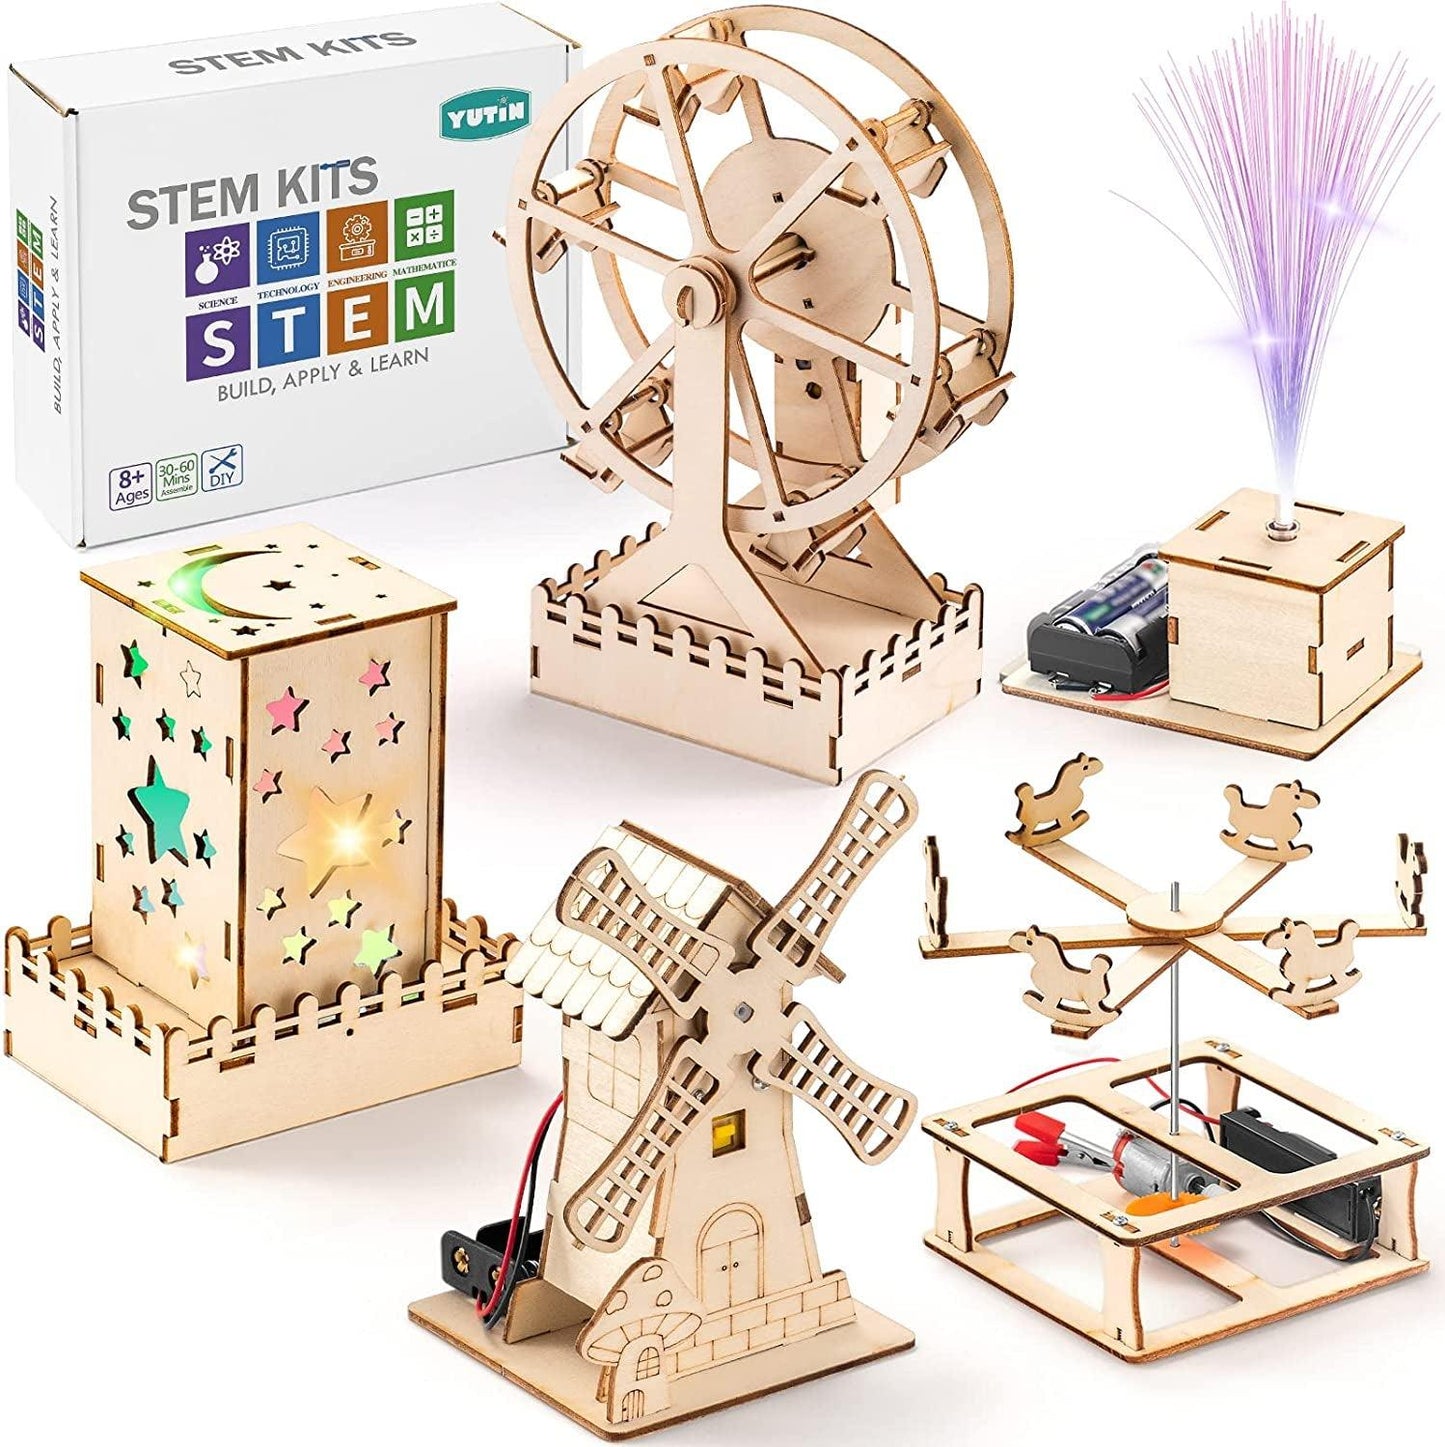 5 in 1 STEM Kits for Kids，Wood Craft Kit for for Boys Ages 8-12, DIY Science Building Projects - WoodArtSupply